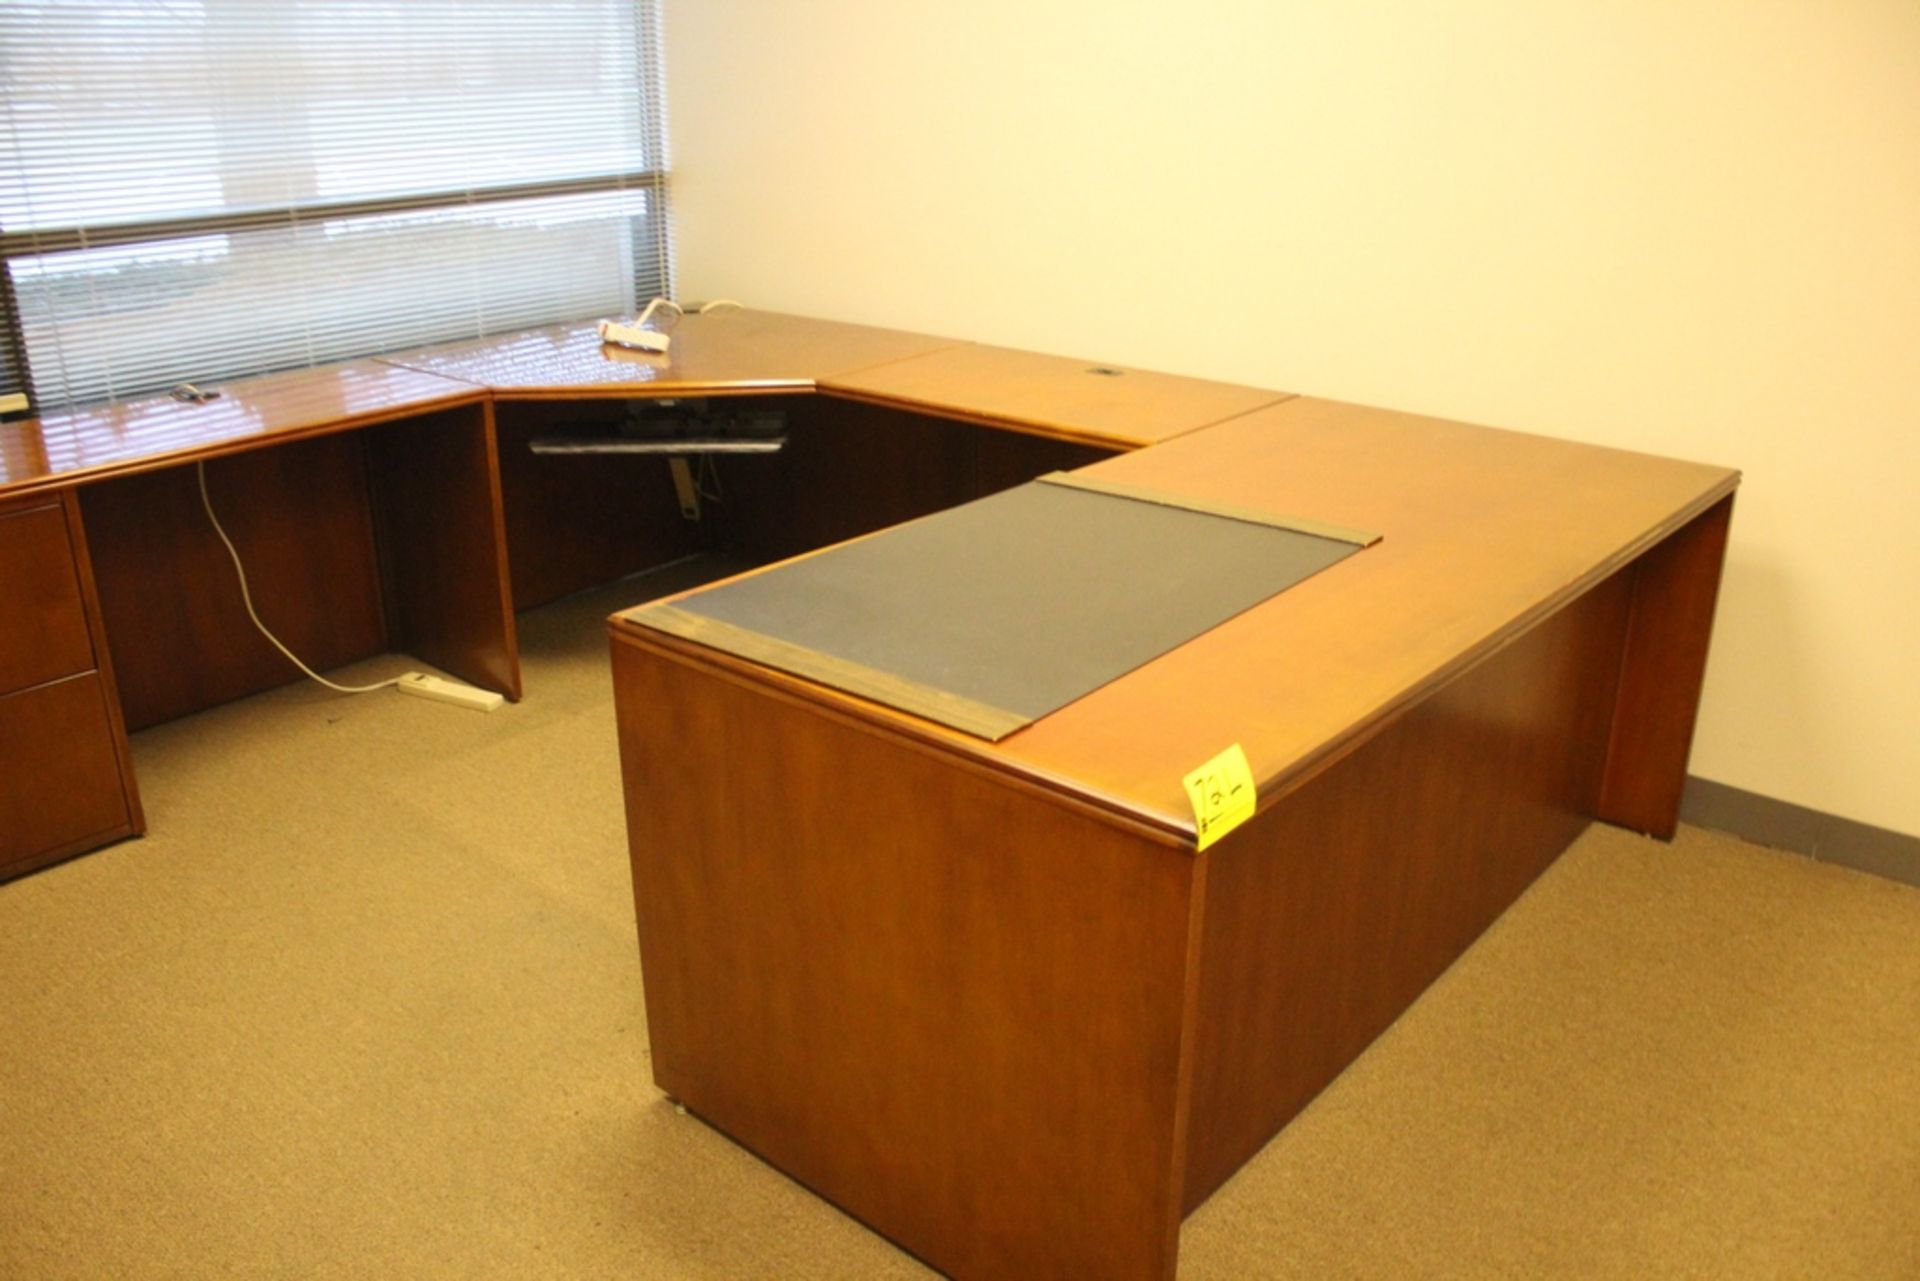 U-SHAPED OFFICE DESK, 114" X 72" WITH CREDENZA - Image 2 of 5